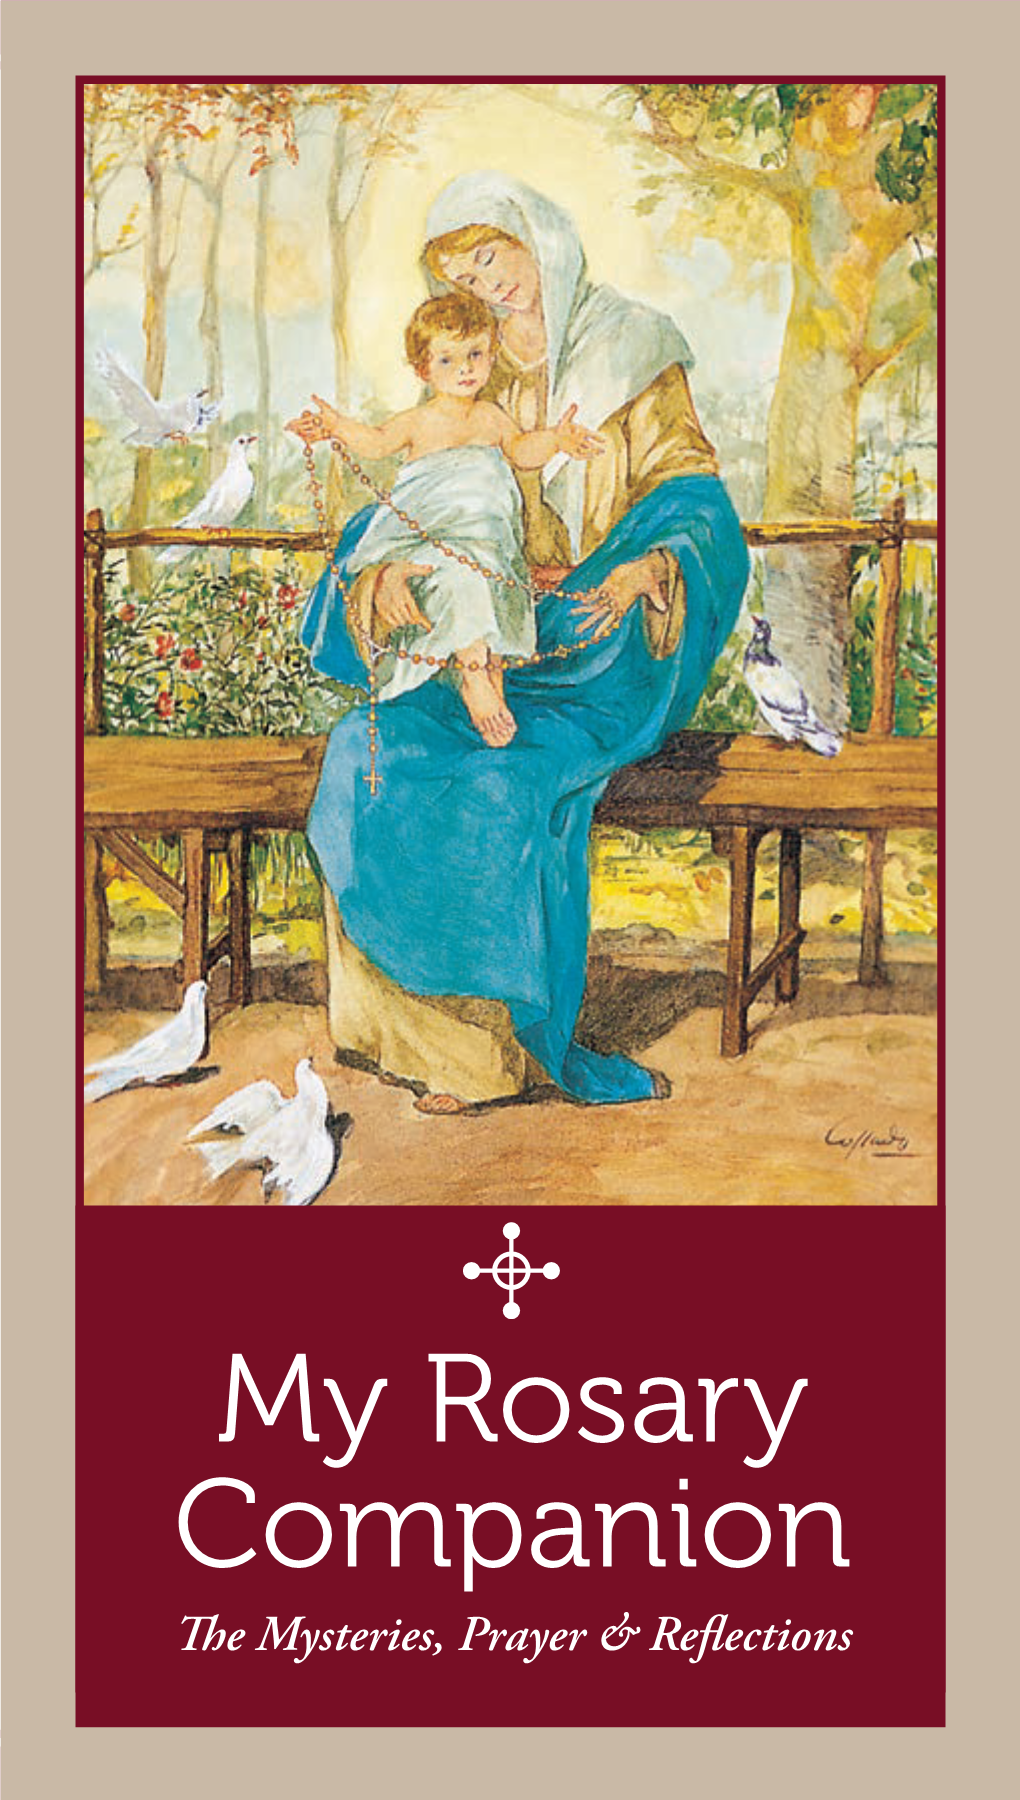 My Rosary Companion the Mysteries, Prayer & Reflections 1 Dear Friend, Bishop James E